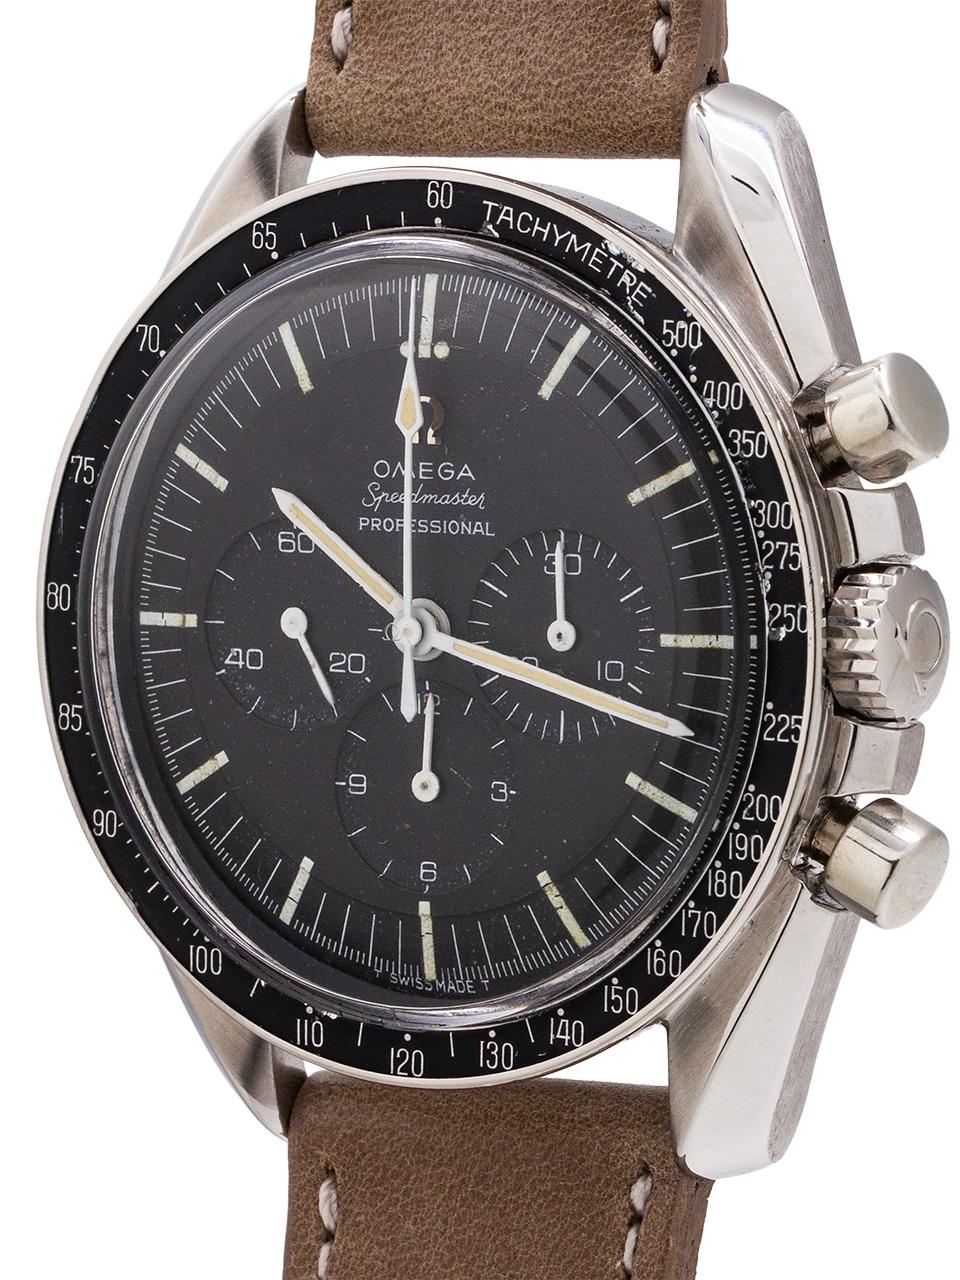 
Omega Speedmaster Pre Man on the Moon model ref 105.012-65 model circa 1965. Featuring a very pleasing condition original matte black, pie pan dial with aged luminous indexes. The hands are original, though they do seem to have been slightly